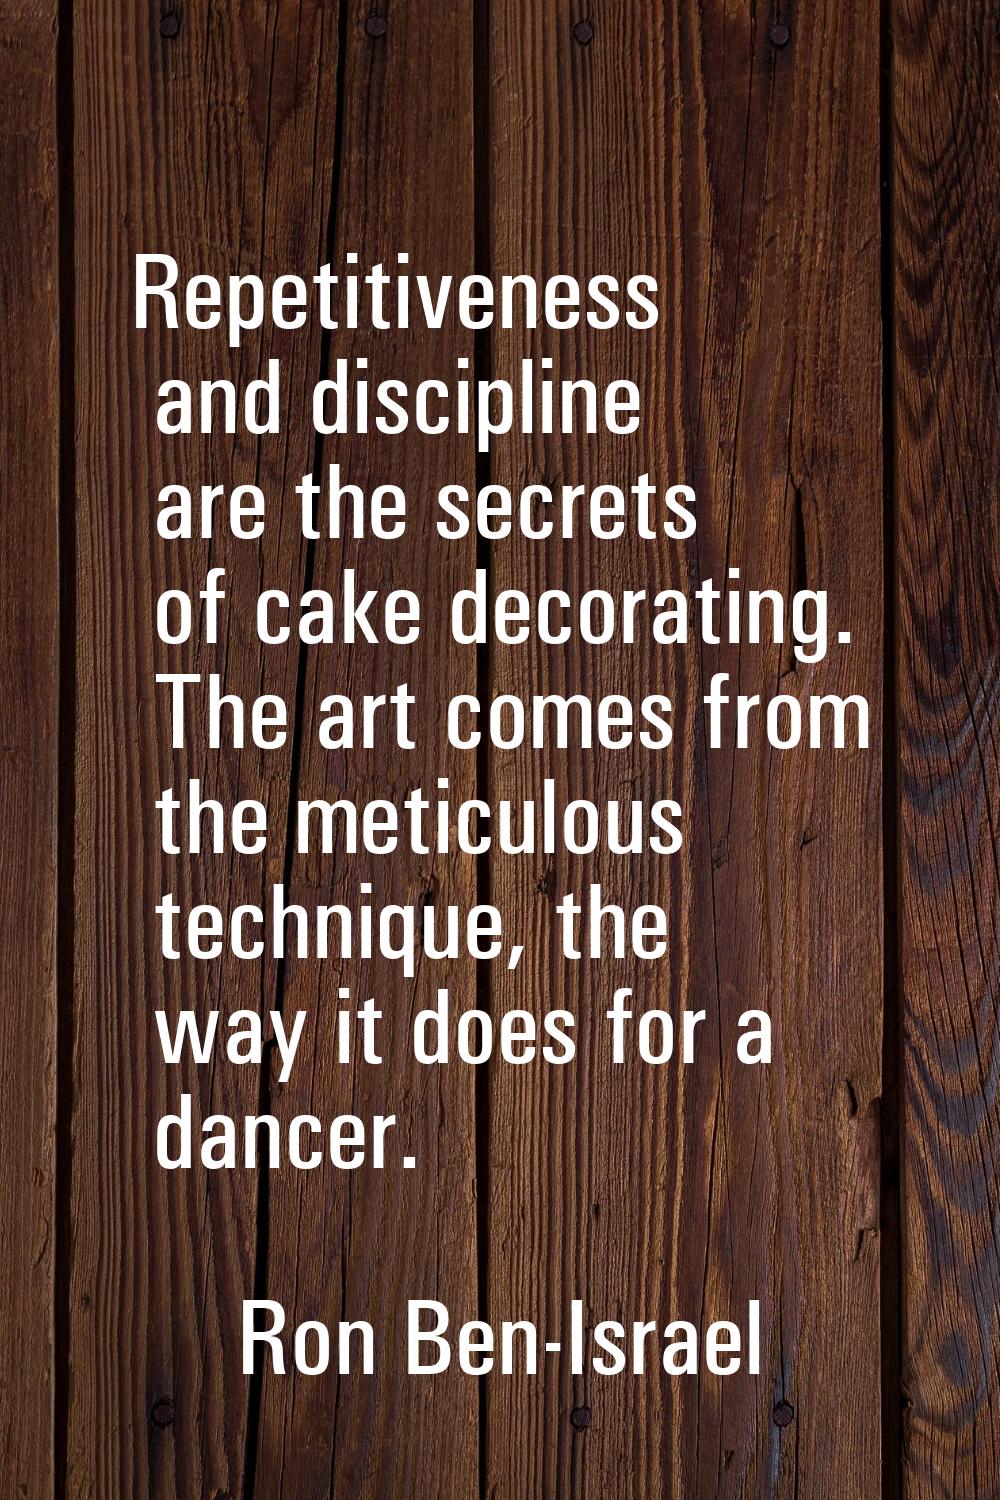 Repetitiveness and discipline are the secrets of cake decorating. The art comes from the meticulous